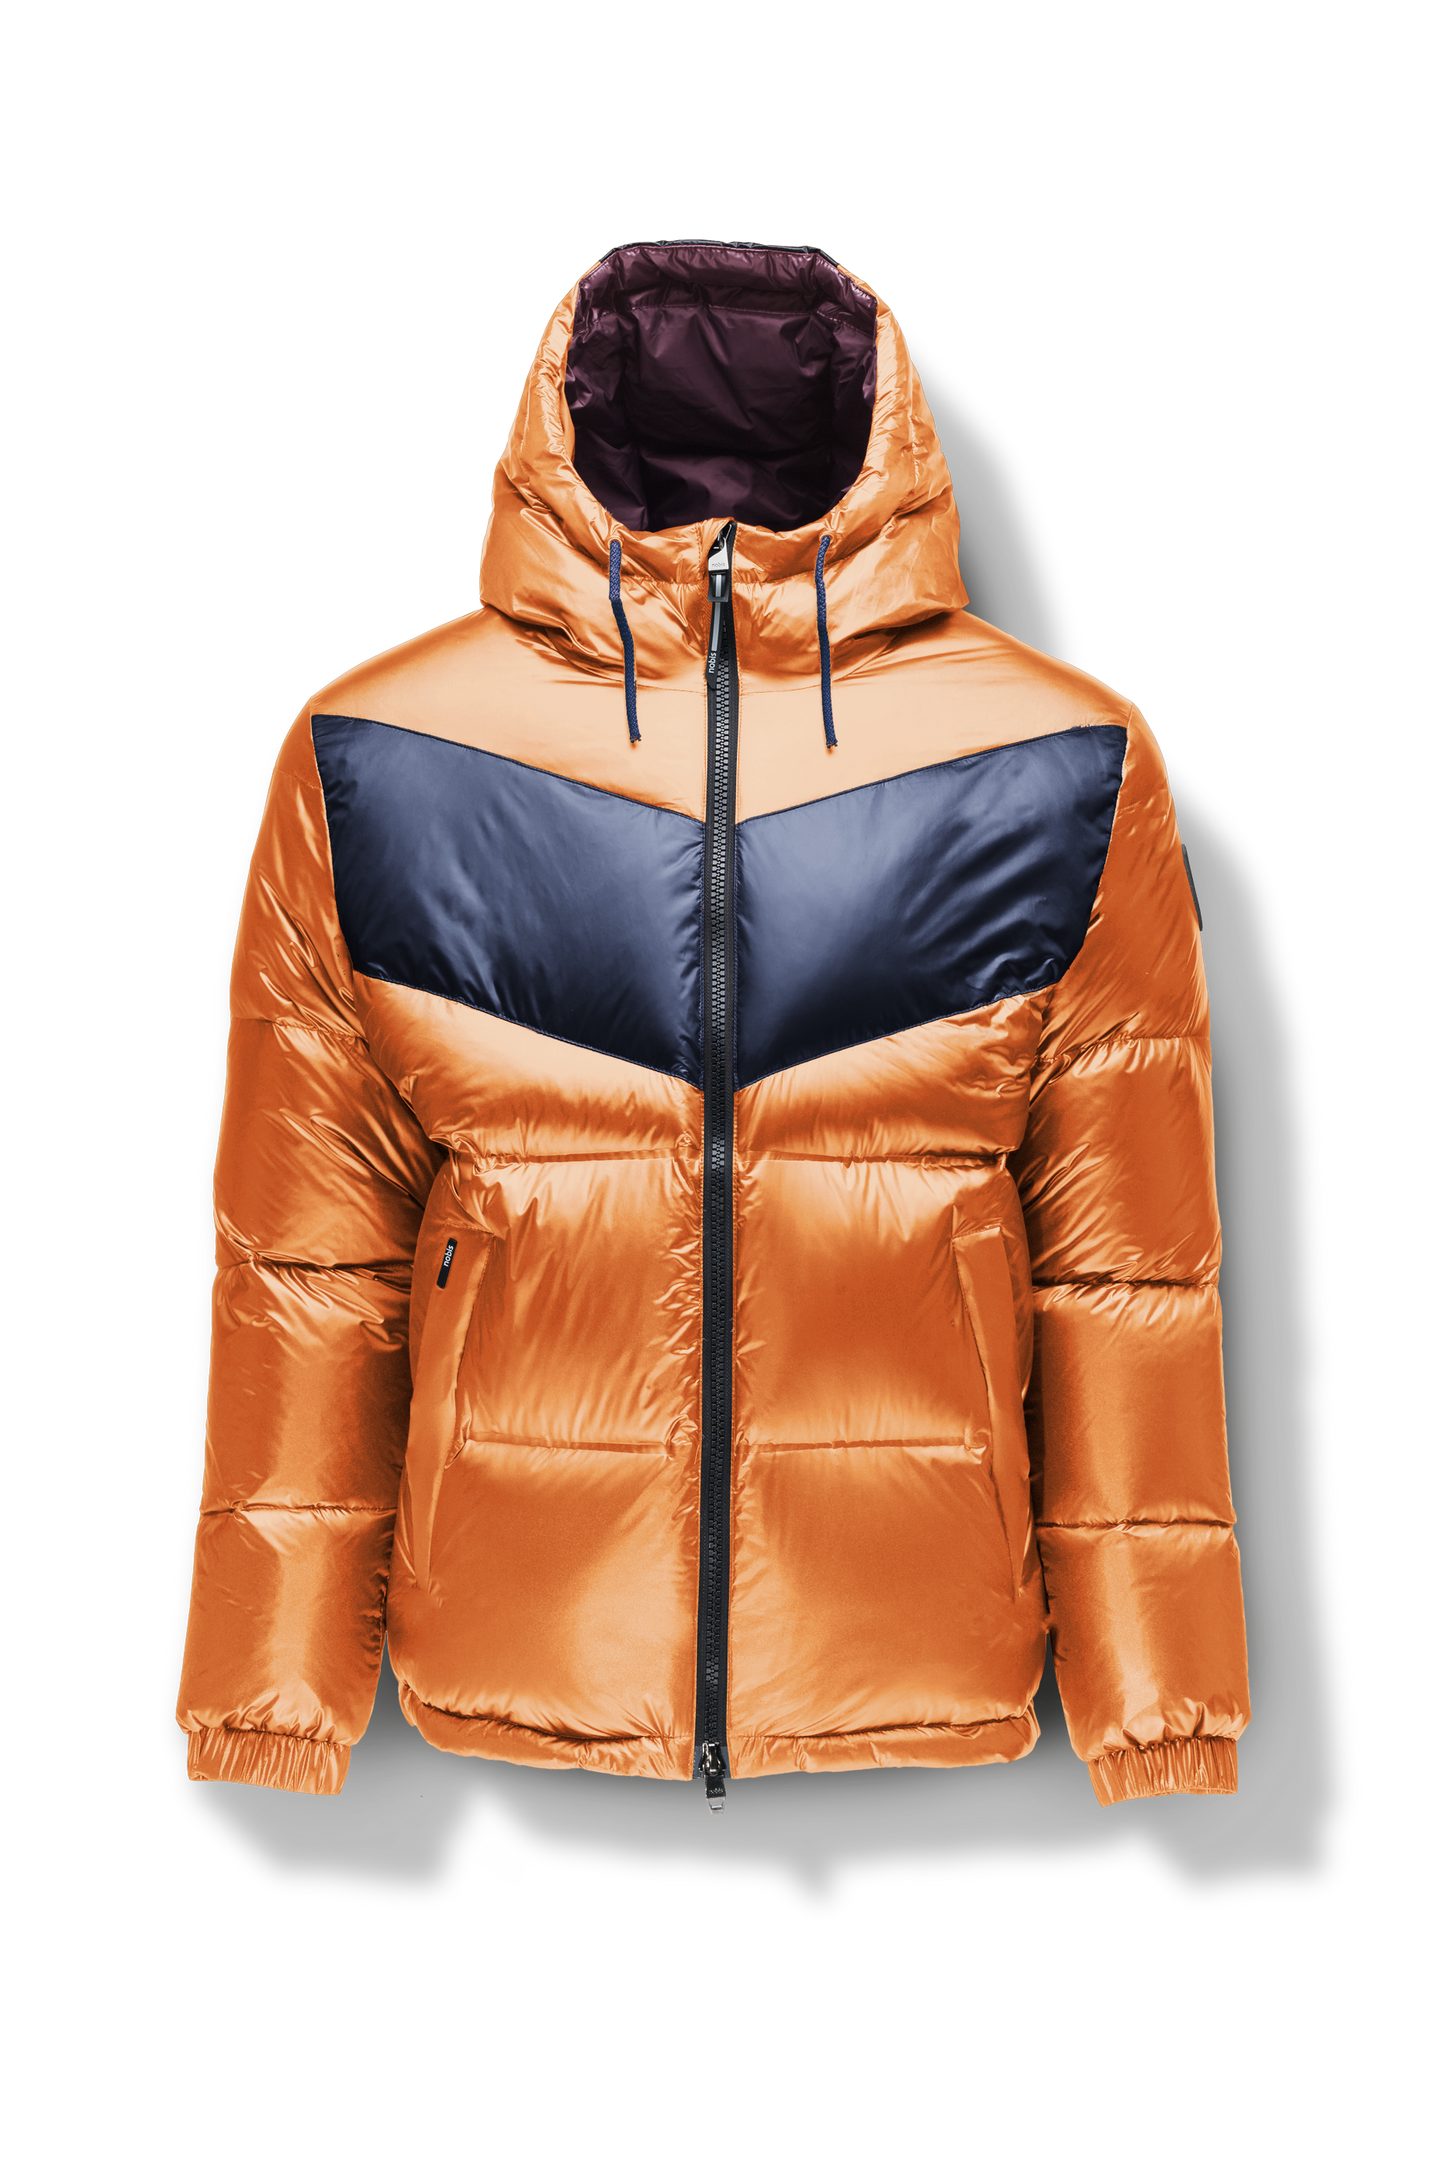 Dyna Men's Chevron Quilted Puffer Jacket in hip length, premium cire technical nylon taffeta fabrication, Premium Canadian origin White Duck Down insulation, non-removable down-filled hood, two-way centre-front zipper, fleece-lined zipper pockets at waist, pit zipper vents, in Burnt Orange